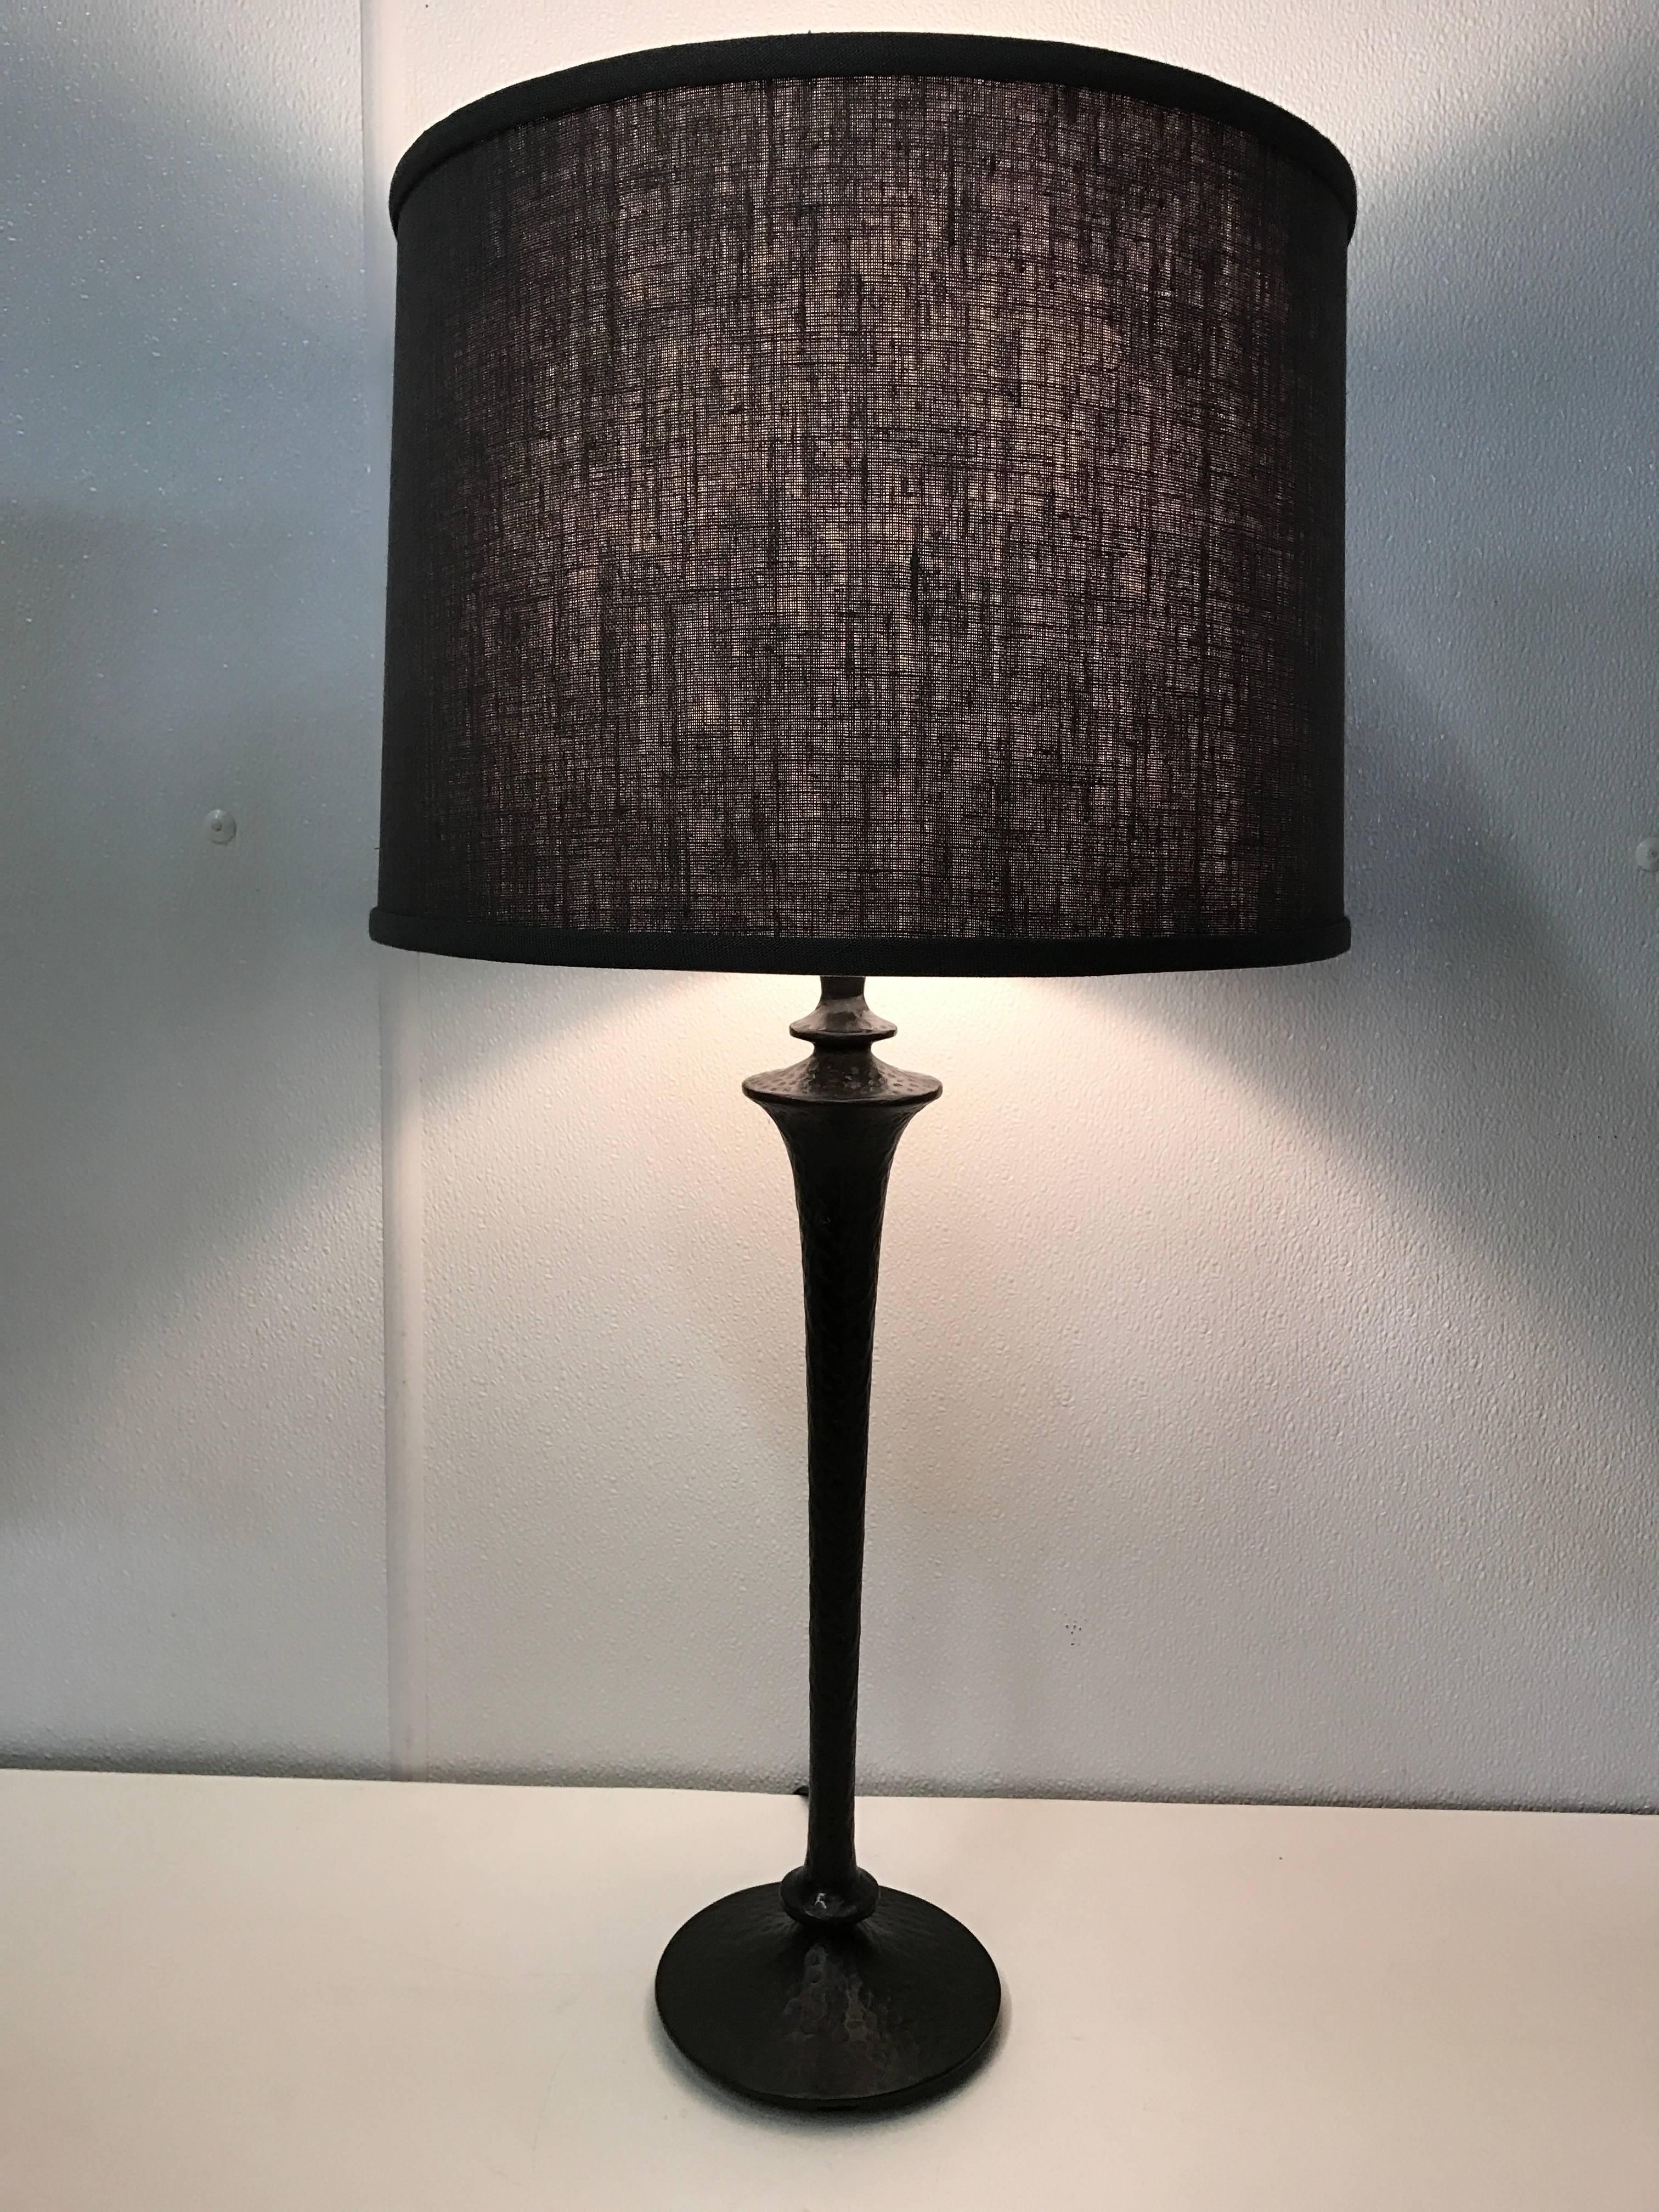 Giacometti style bronze table lamp, Shade for display purposes only.